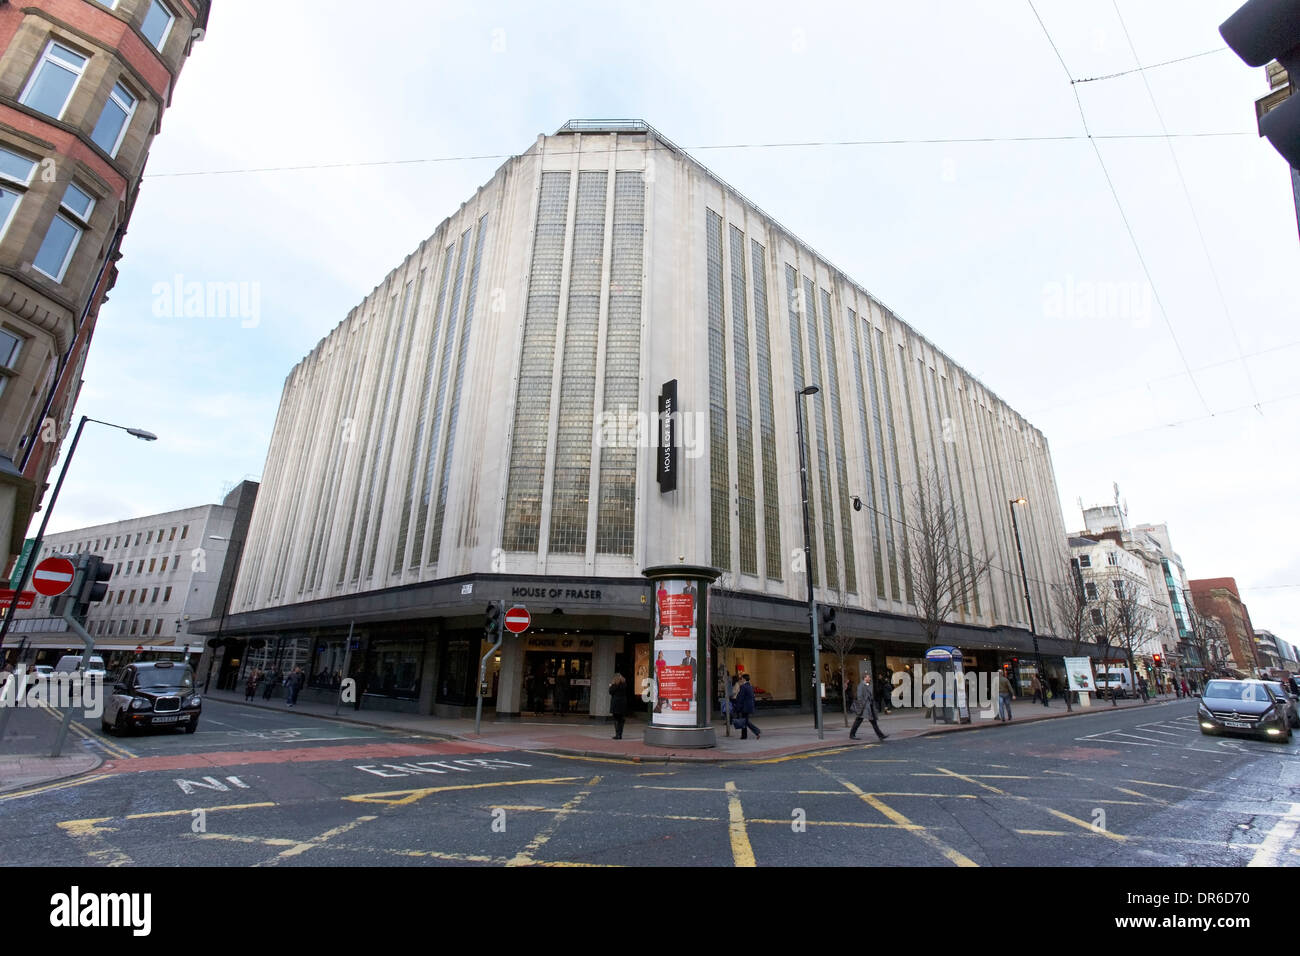 PHOTO  THE LAST CHRISTMAS FOR HOUSE OF FRASER DEANSGATE THE ICONIC DEANSGATE HOU 